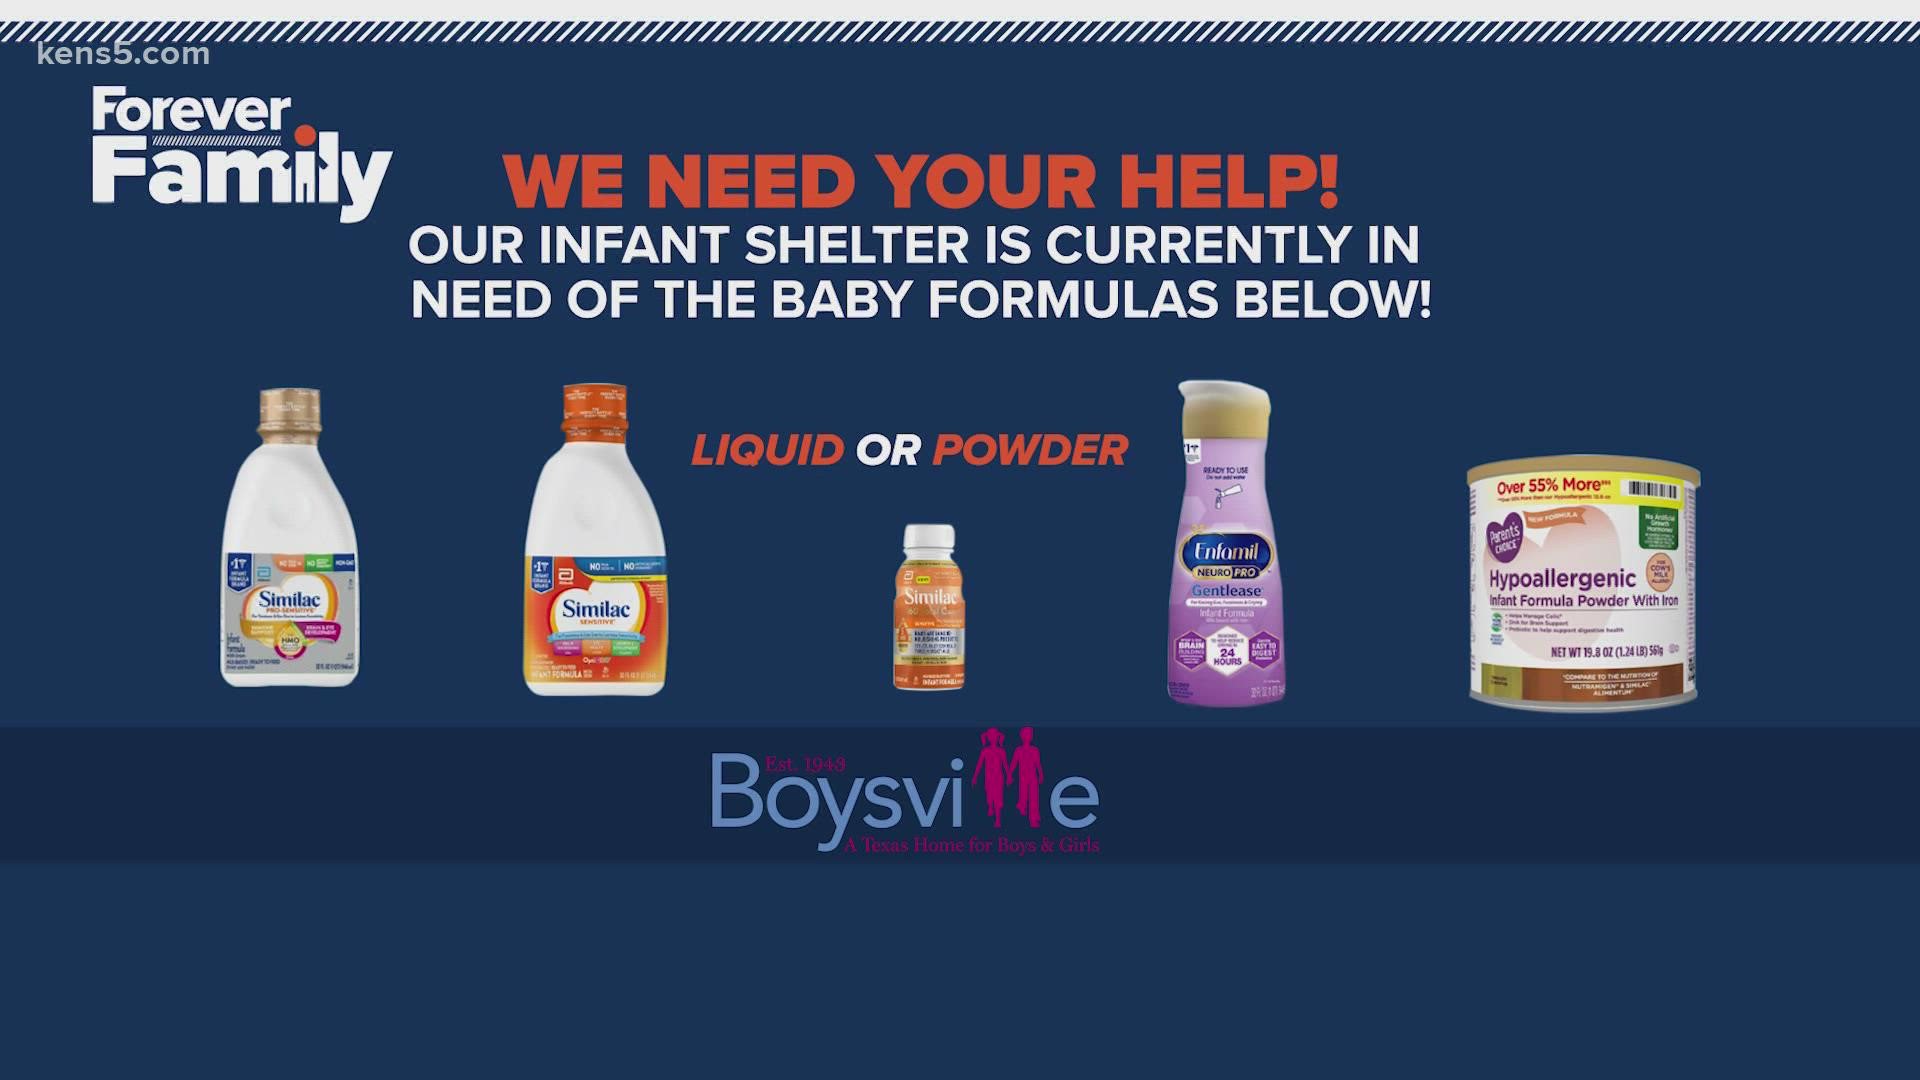 The baby formula shortage is hitting everyone, including local organizations that help infants and toddlers in emergency situations.